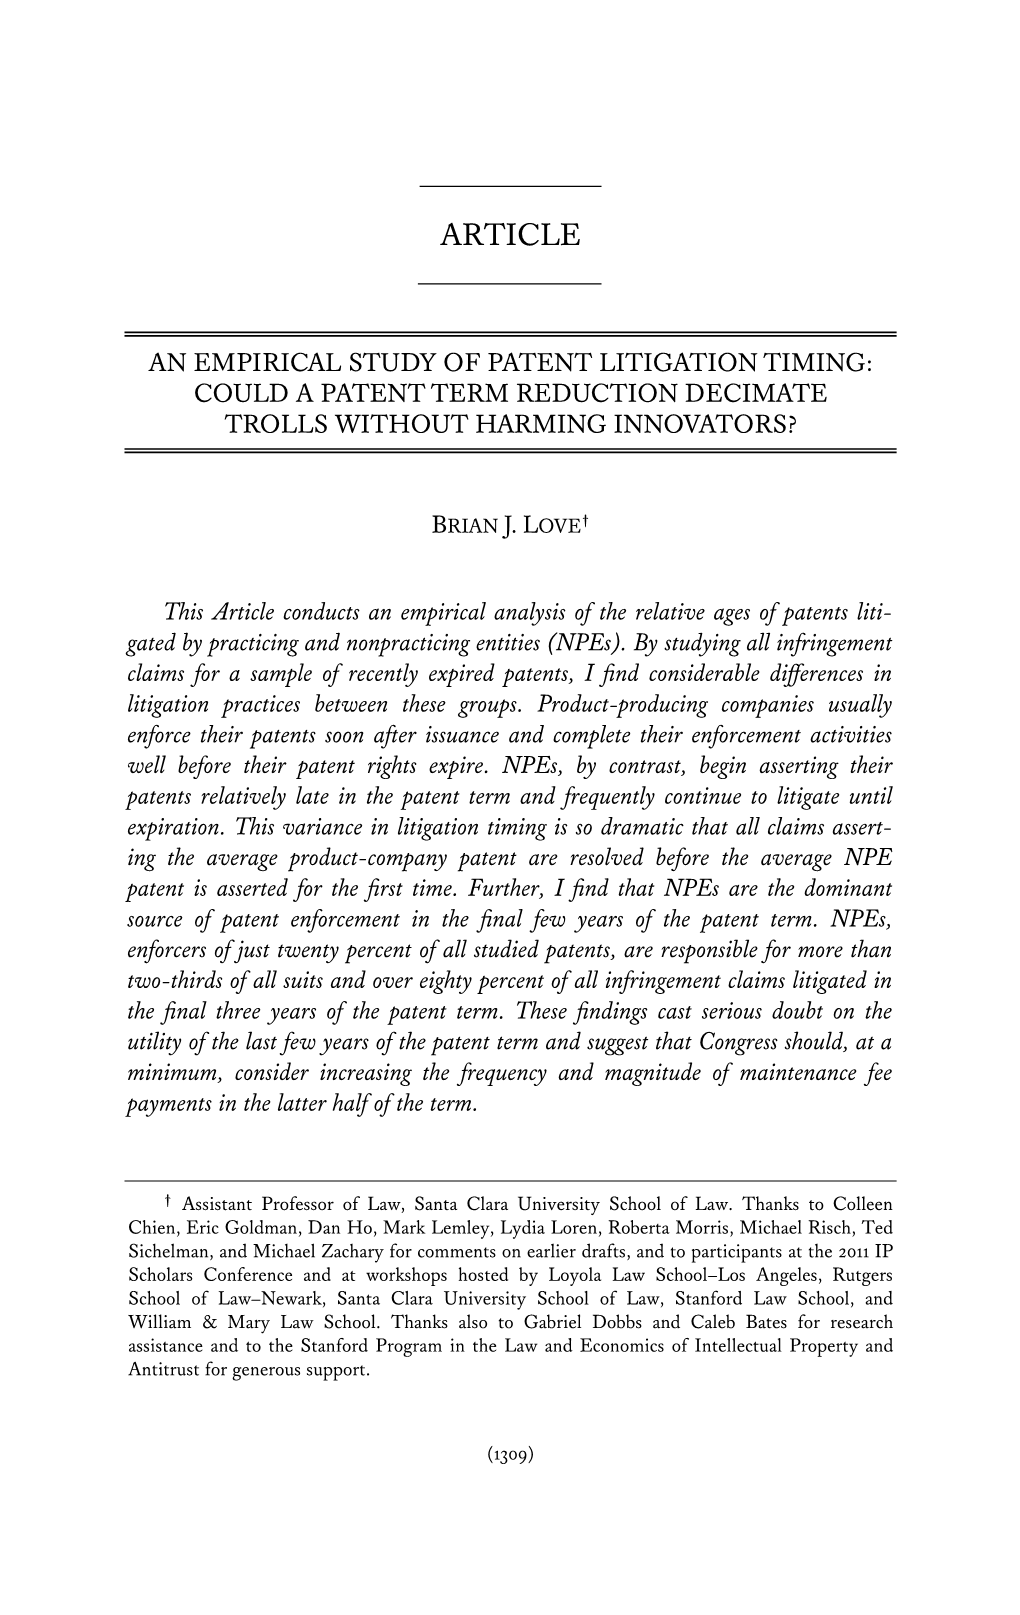 An Empirical Study of Patent Litigation Timing: Could a Patent Term Reduction Decimate Trolls Without Harming Innovators?